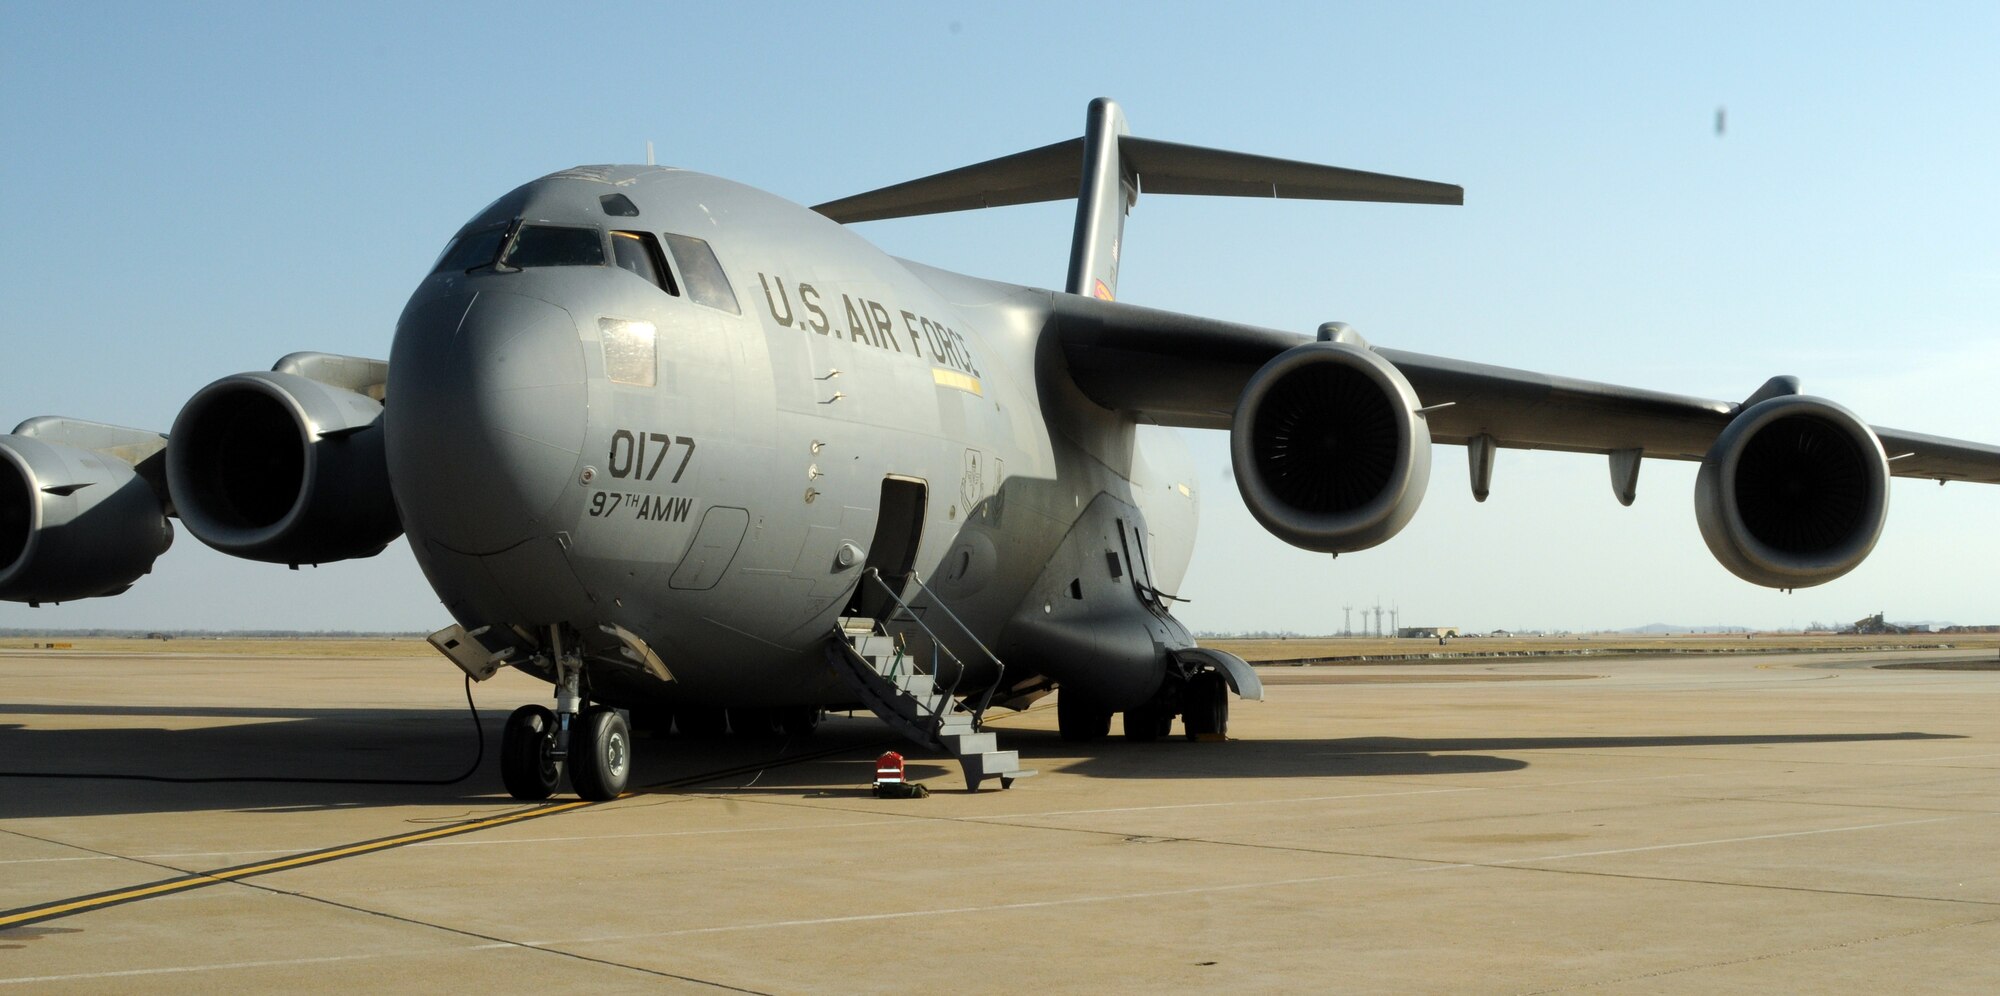 ALTUS AIR FORCE BASE, Okla. -- An Altus C-17 Globemaster III is prepared on the flightline for take-off March 22, in support of Operation Odyssey Dawn. Two Altus C-17s departed in support of Operation Odyssey Dawn March 22 as part of ongoing operations in Libya. (U.S. Air Force photo by Airman 1st Class Kenneth W. Norman/ Released 97th Air Mobility Wing Public Affairs.)